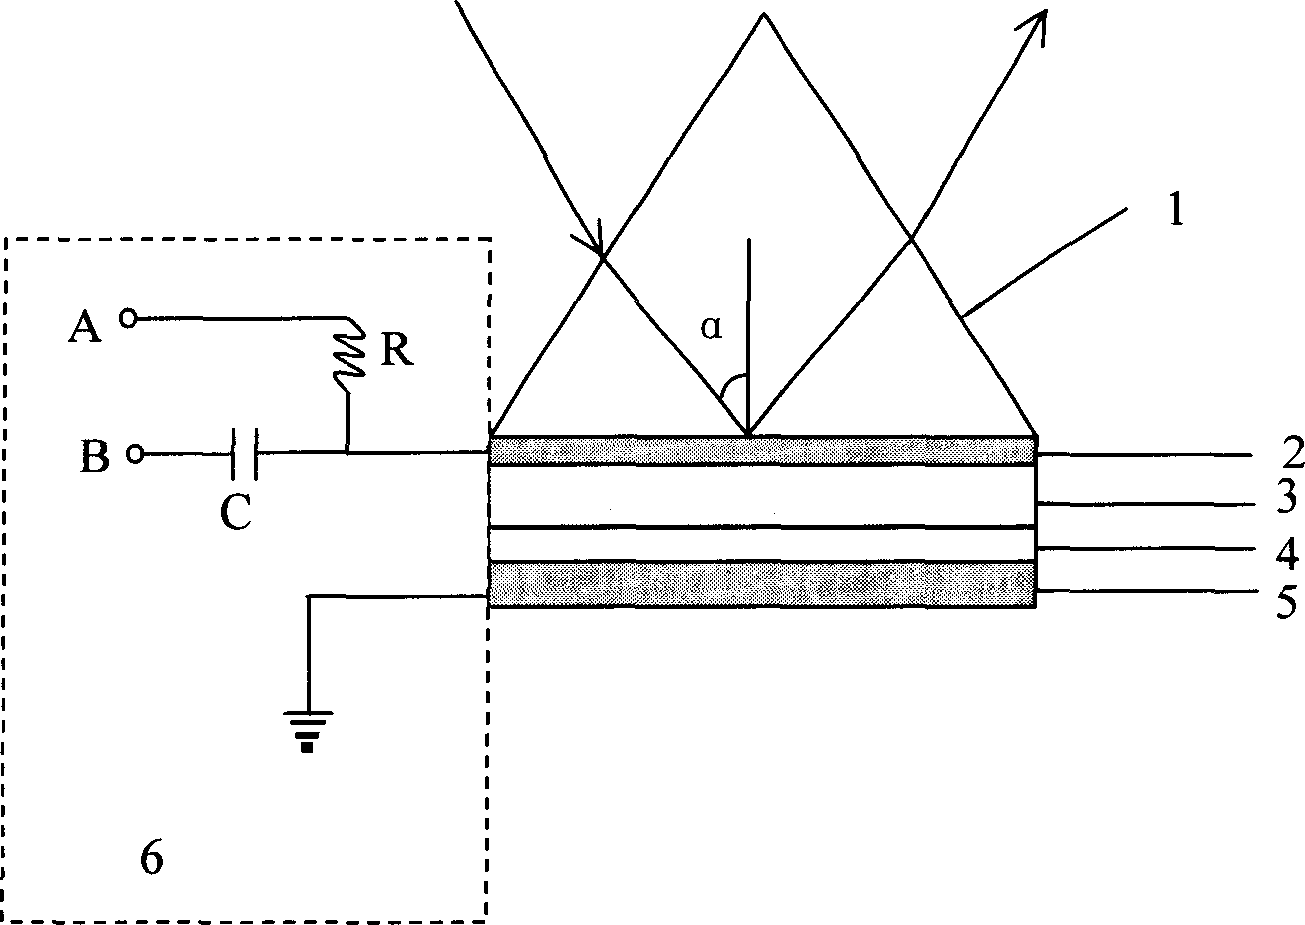 Electro-optical modulating method and device for transmission light based on tri-step electro-optical materials